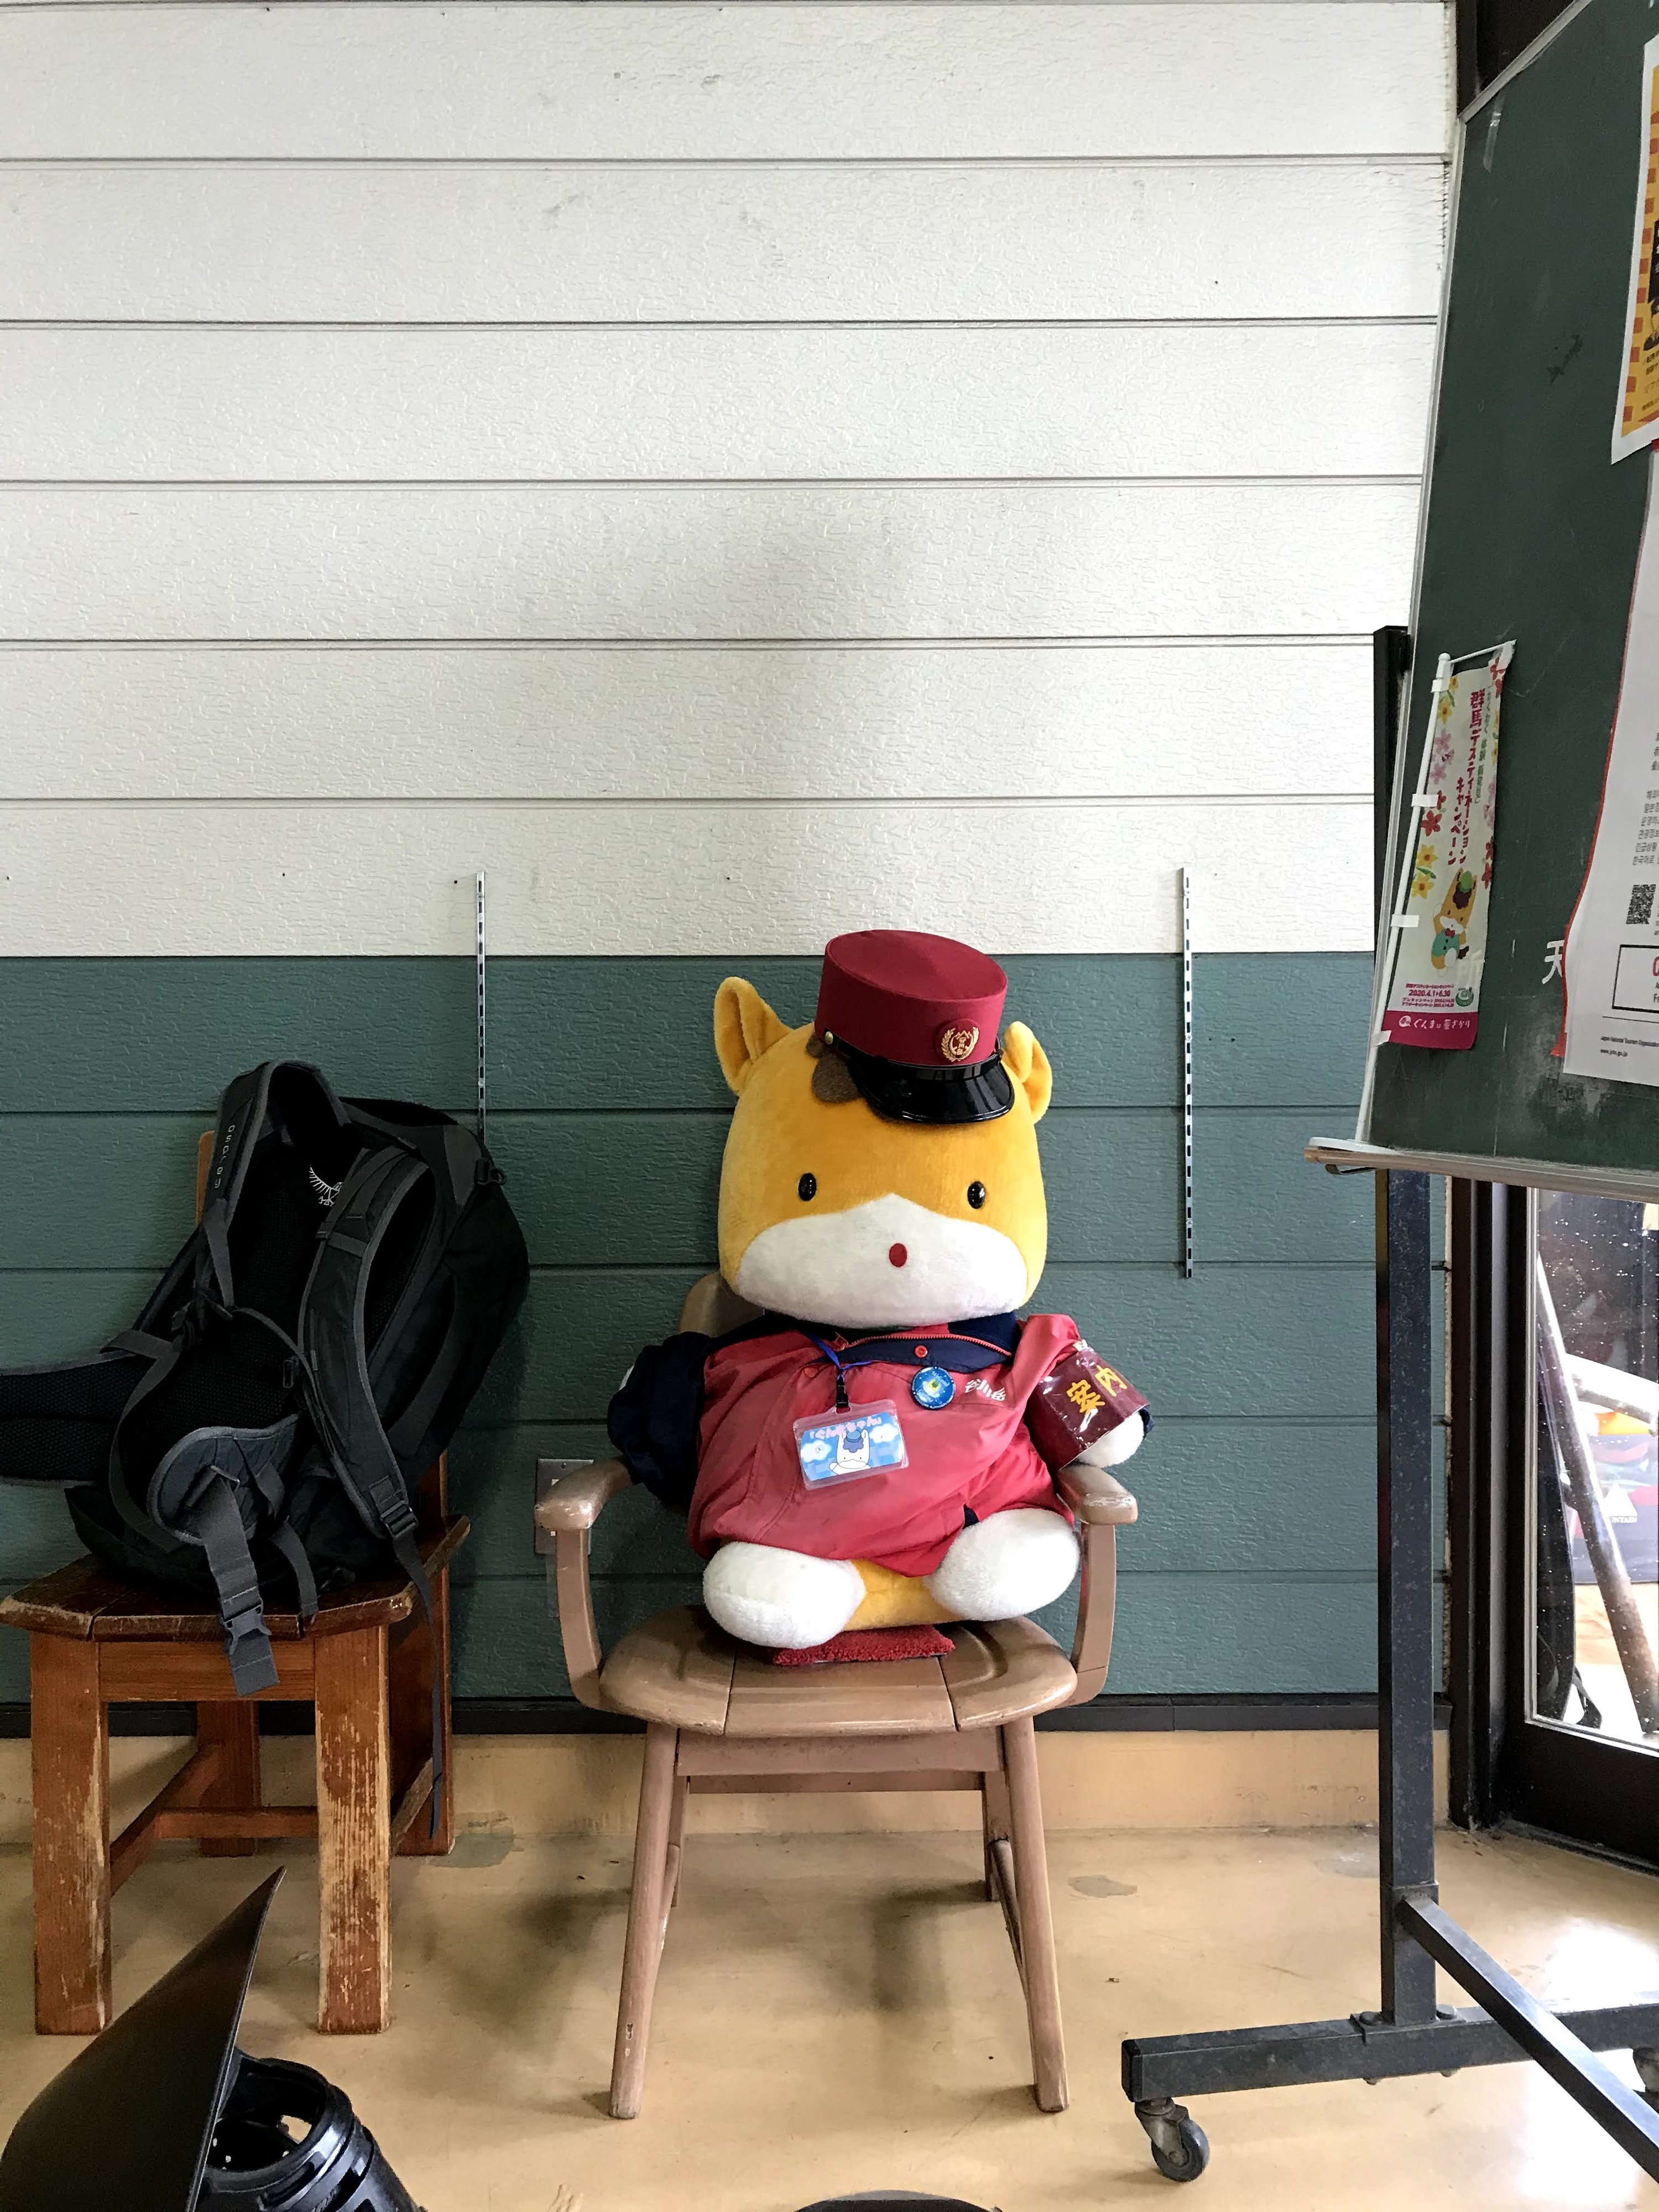 A stuffed animal on a wooden seat